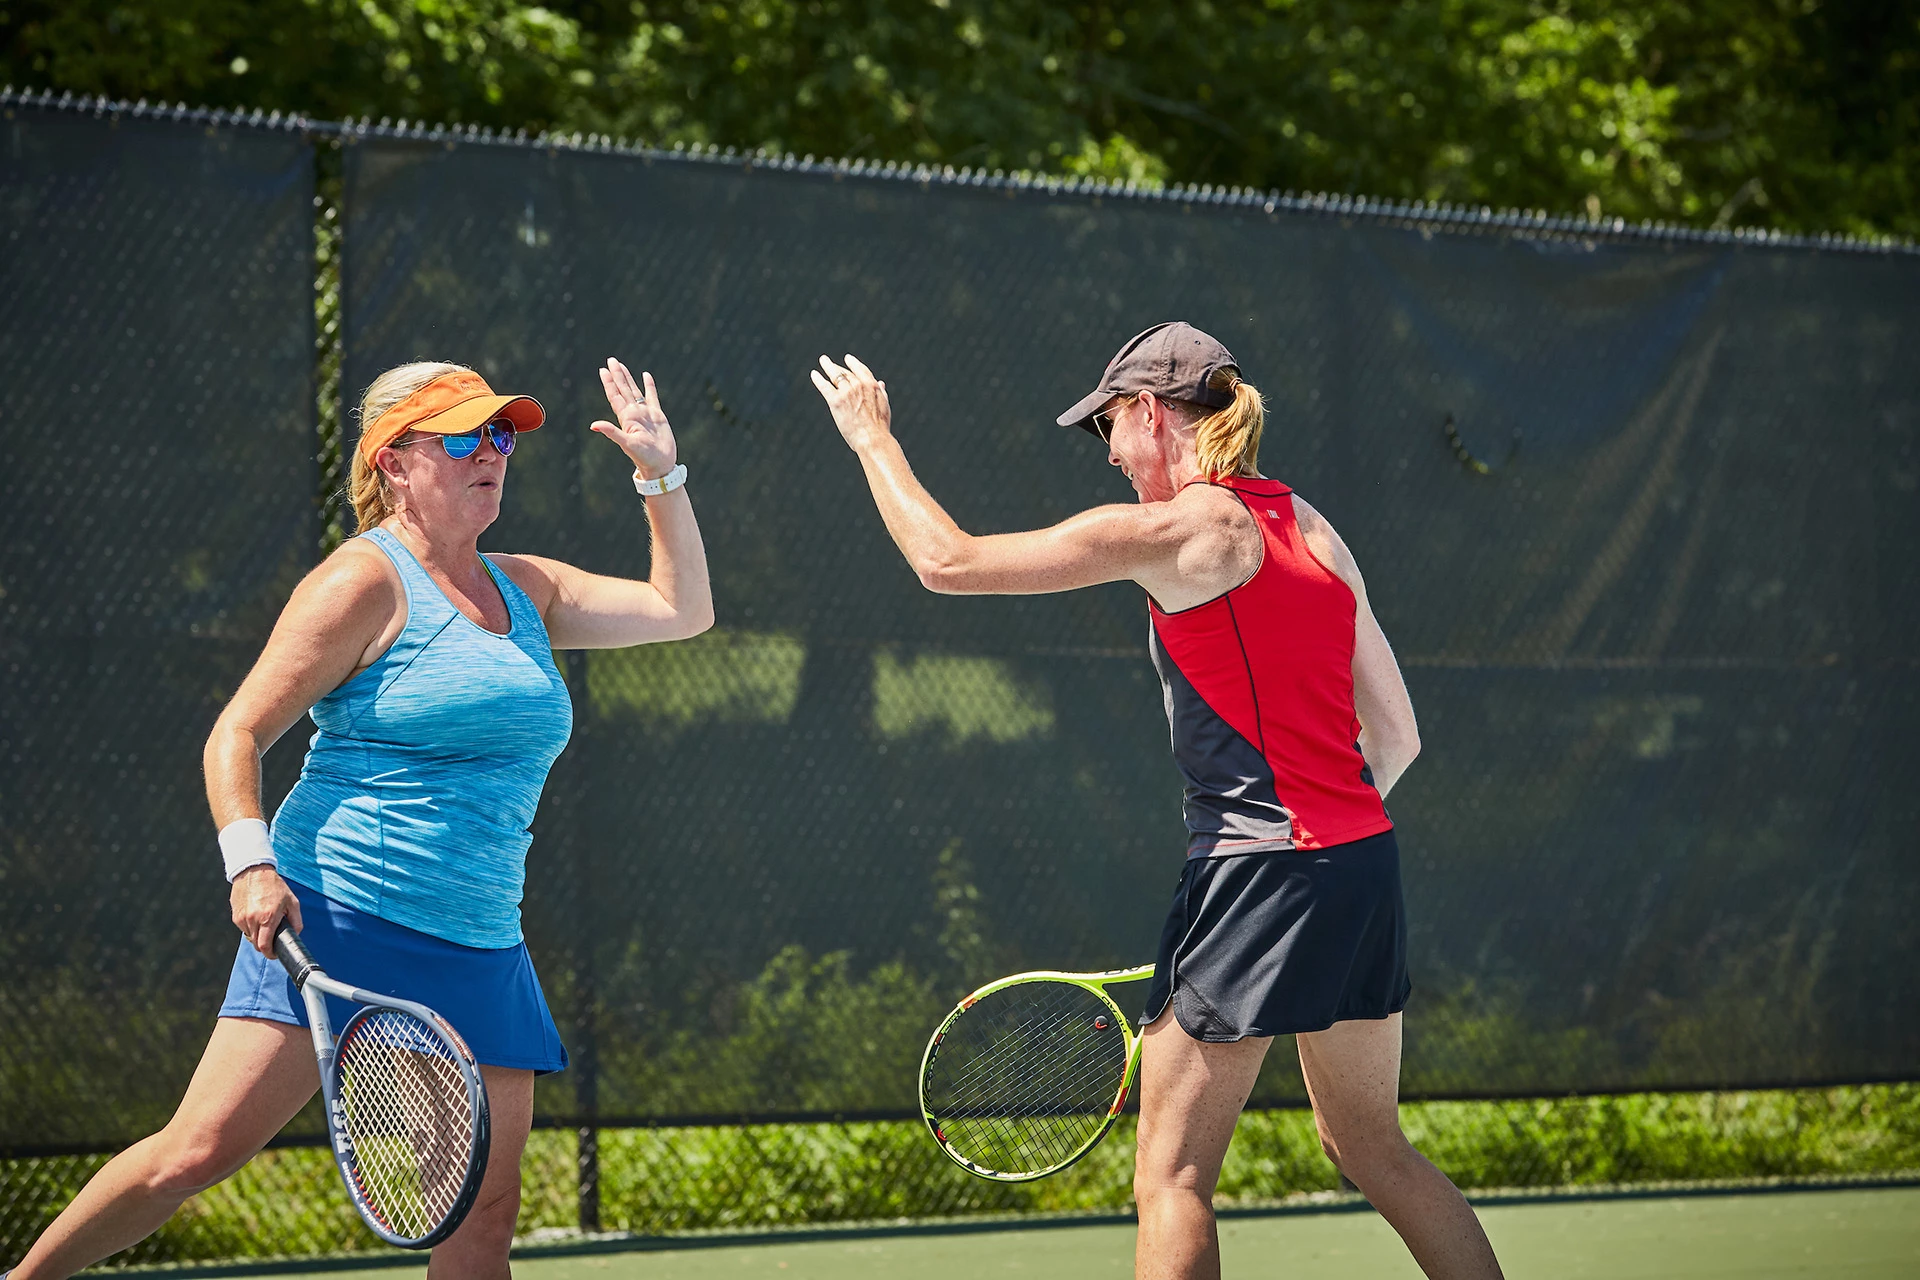 Temple Hills Country Club - Members playing tennis